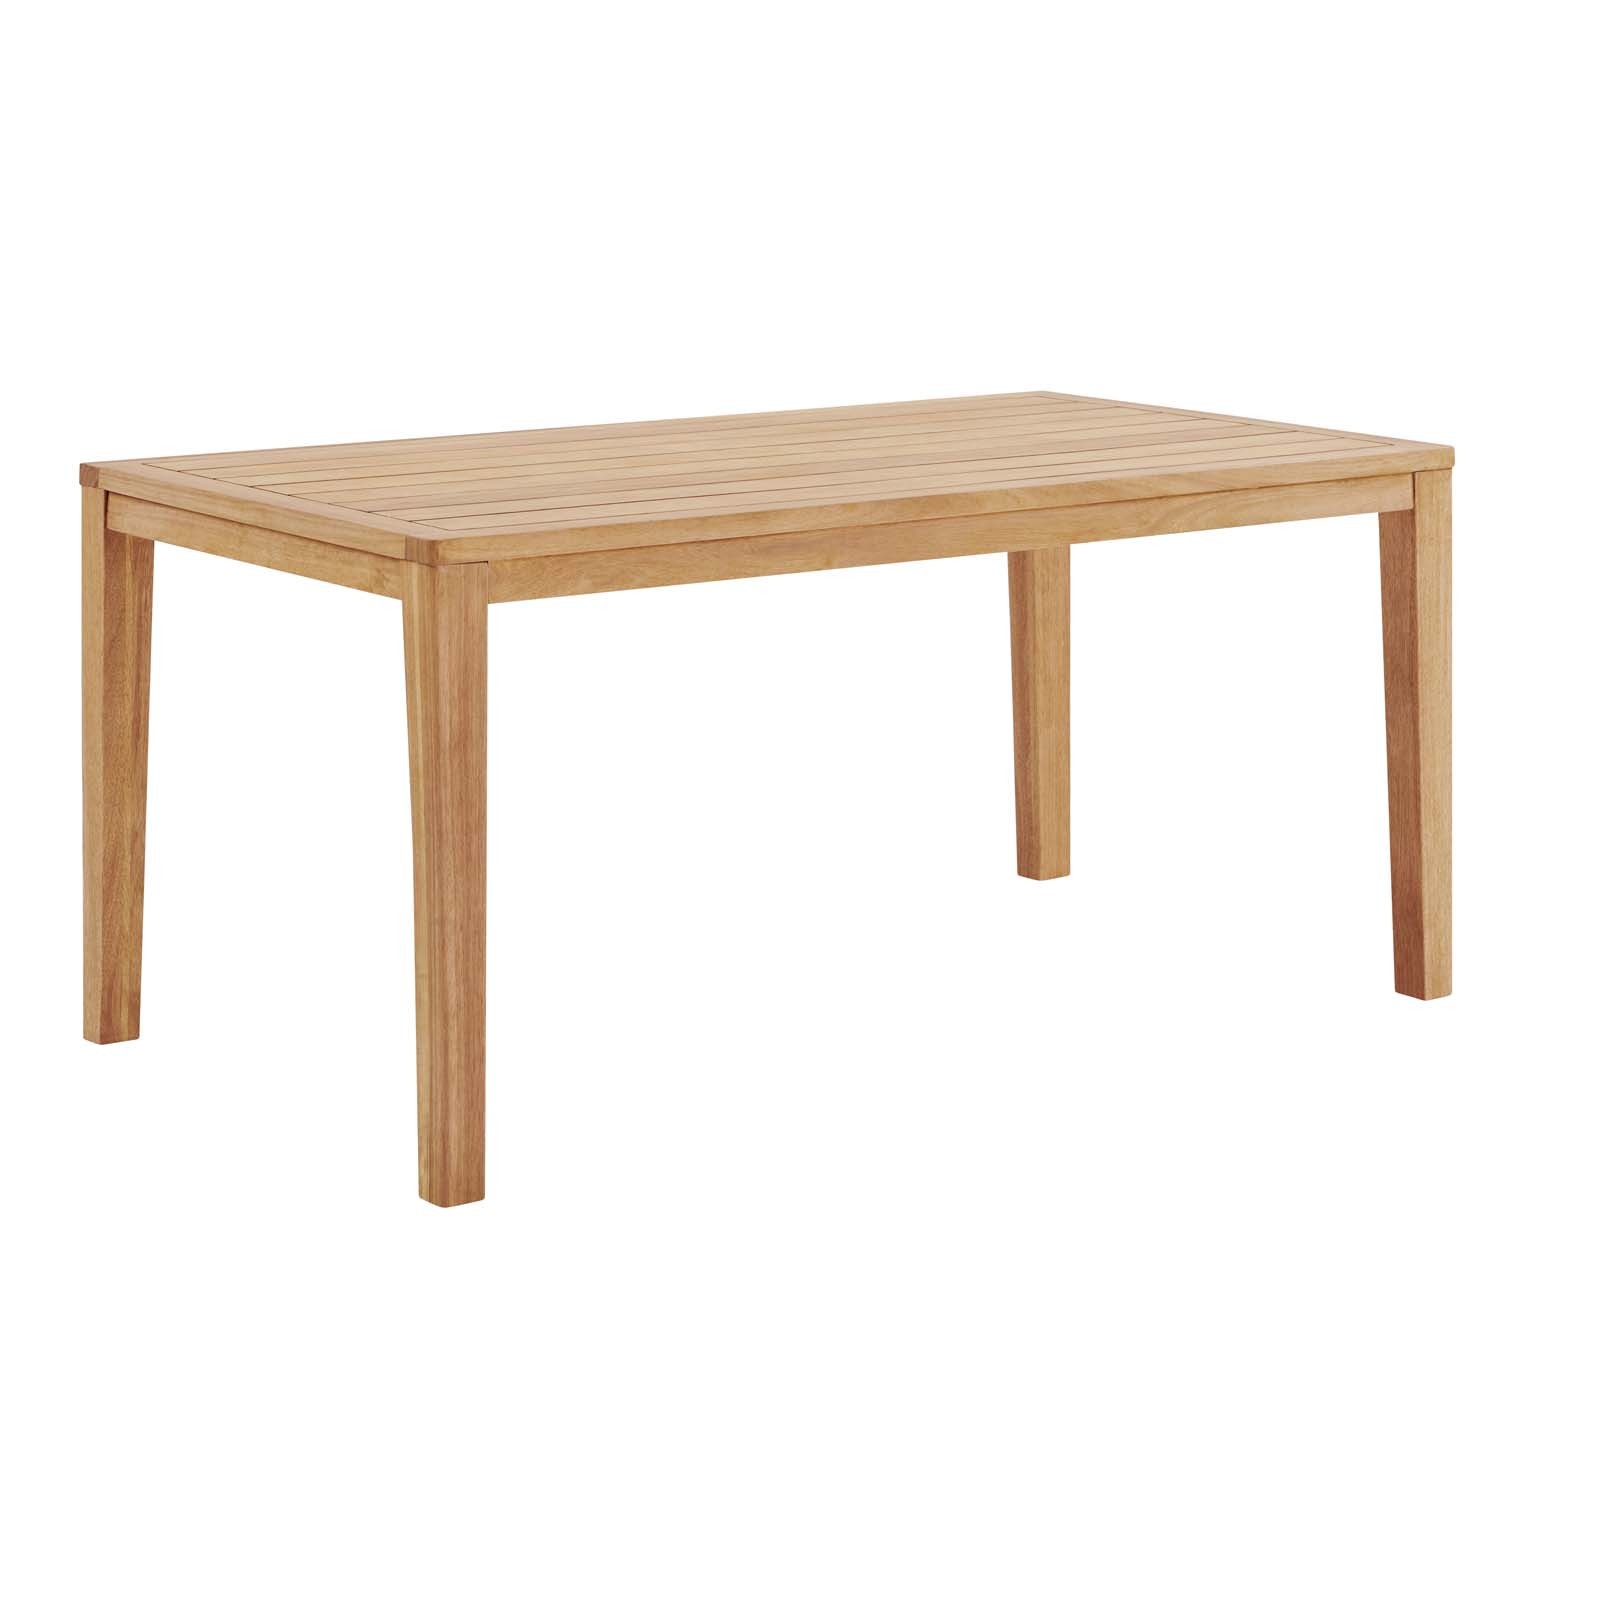 Portsmouth 63 Inch Karri Wood Outdoor Patio Dining Table in Natural